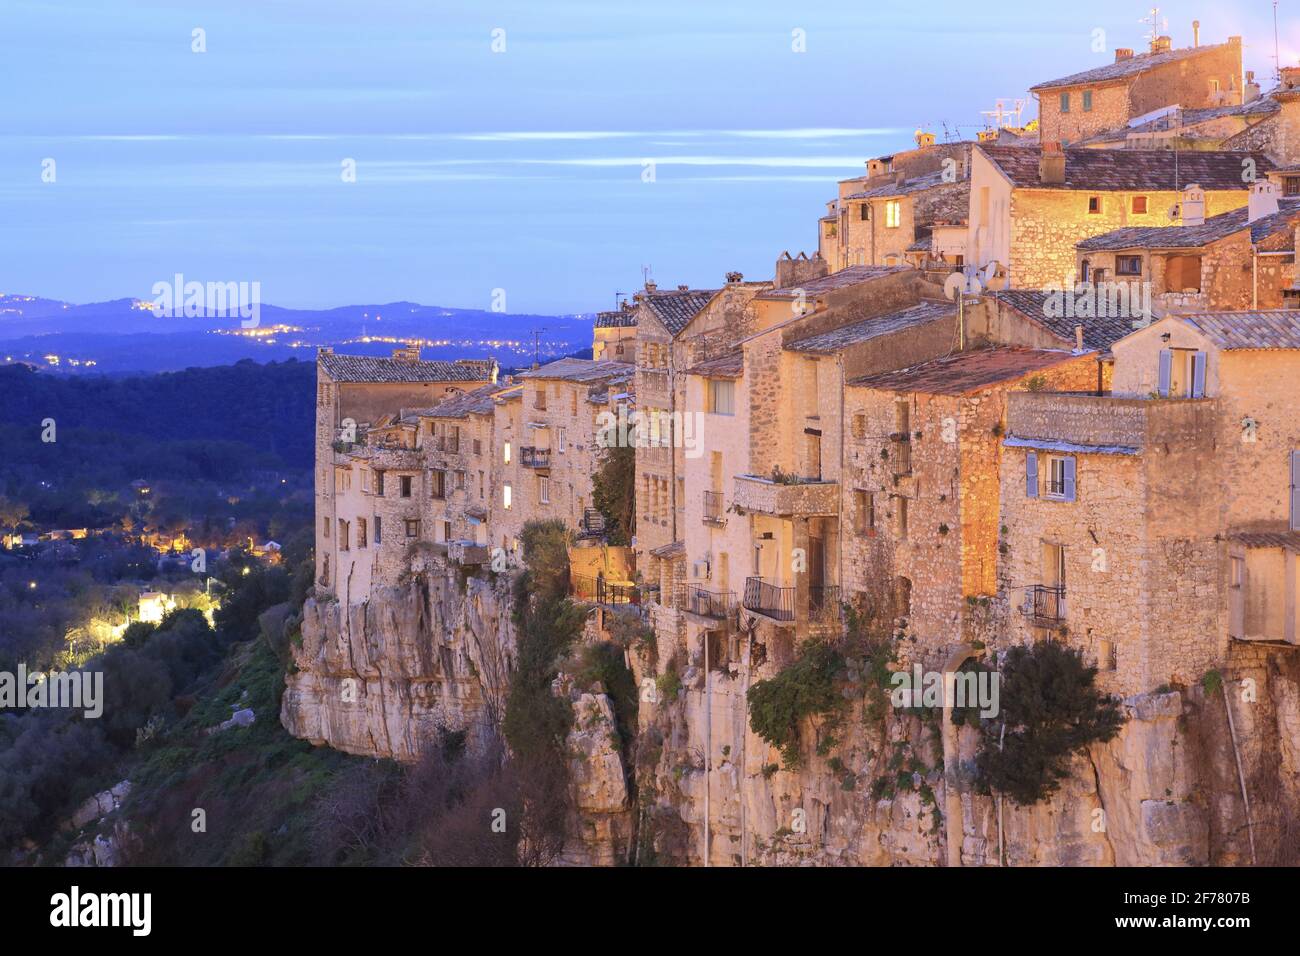 France, Alpes Maritimes, Tourrettes sur Loup, general view at nightfall on the medieval village located on a rocky outcrop Stock Photo